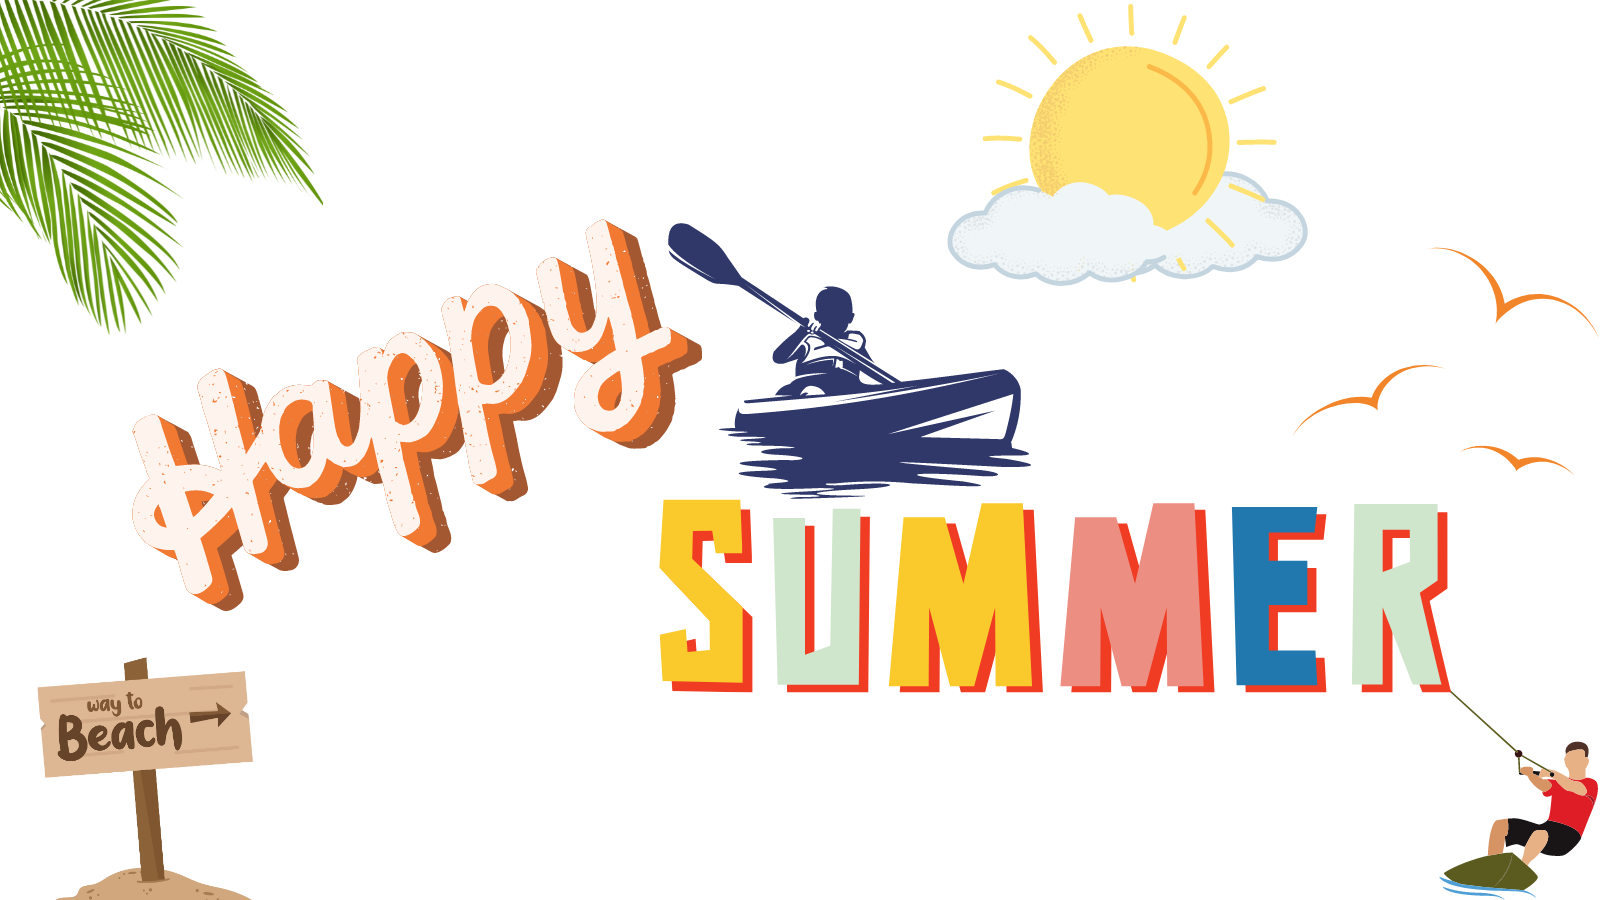 Summer Break 2023 is here! Yay! In preparation, we want to share a list of creative and relaxing activities to enjoy with family and friends during your break. Thank you for the impact YOU make in the lives of our kids and their futures. Now, enjoy a much